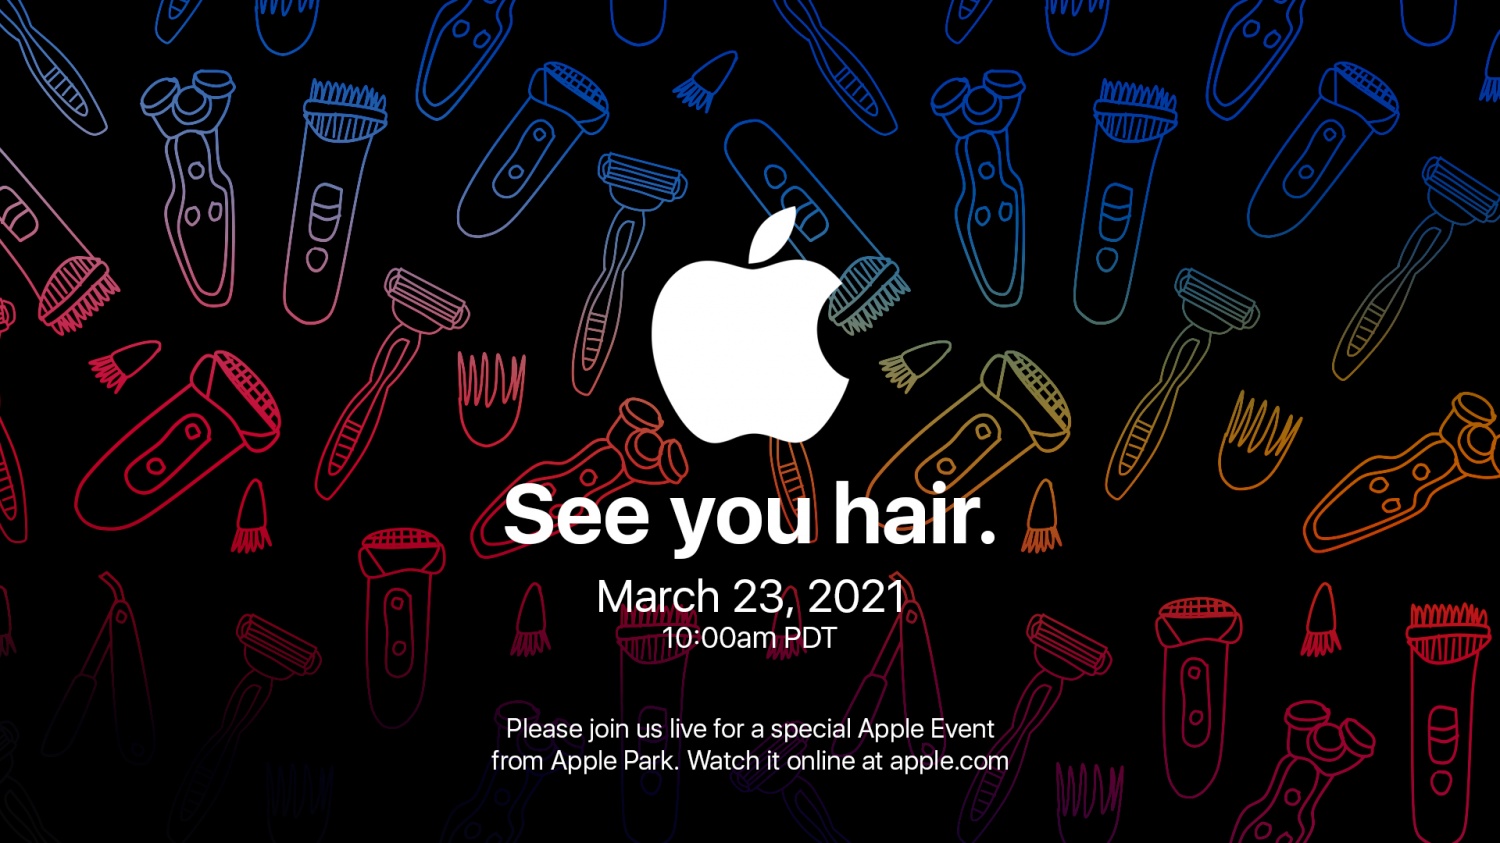 will-there-really-be-an-apple-event-on-march-23